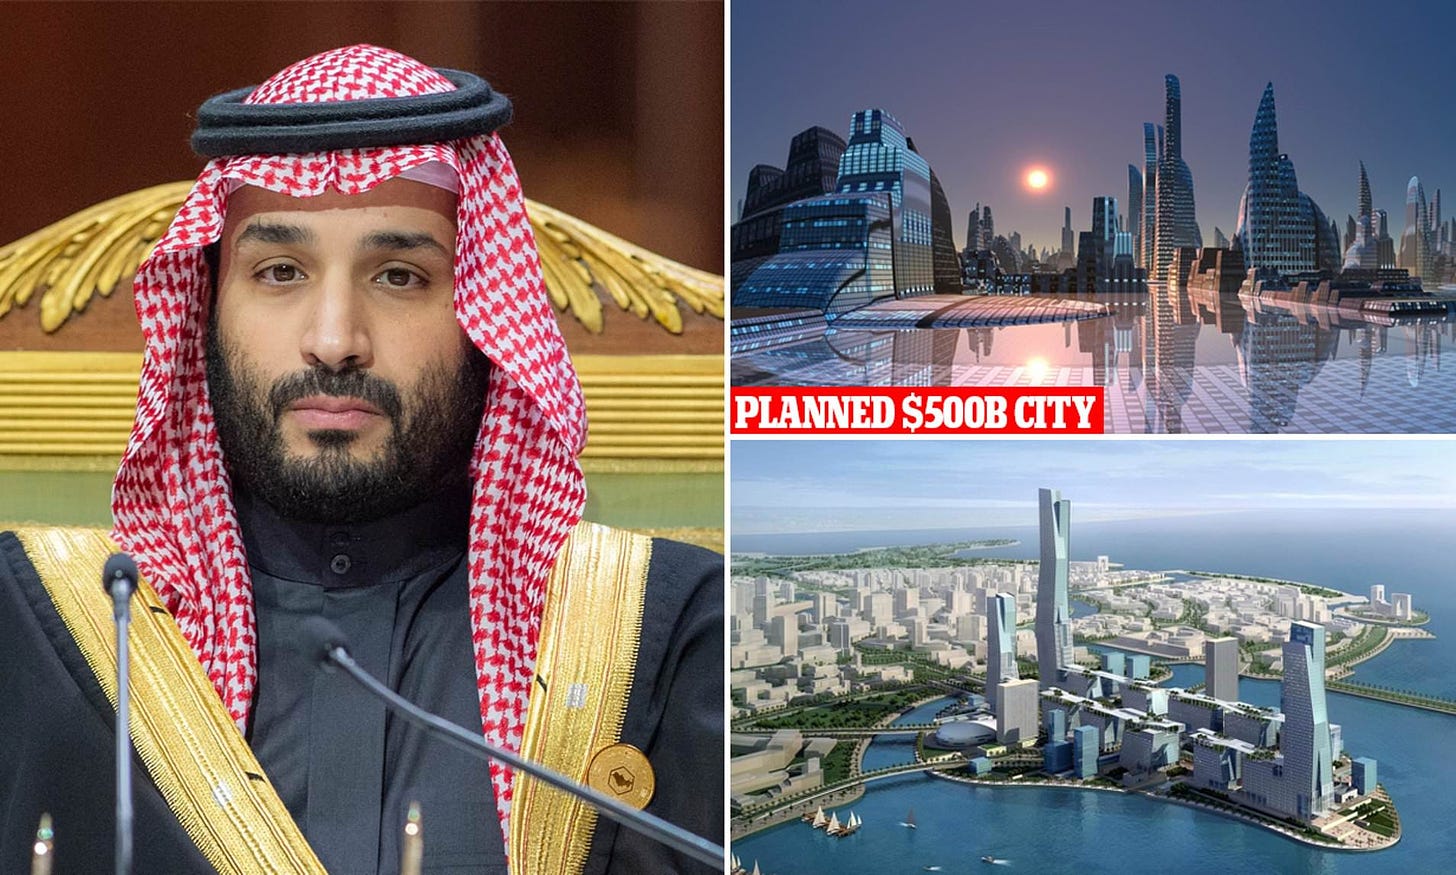 MBS plans to woo Wall Street with his 'Neom' megaproject | Daily Mail Online